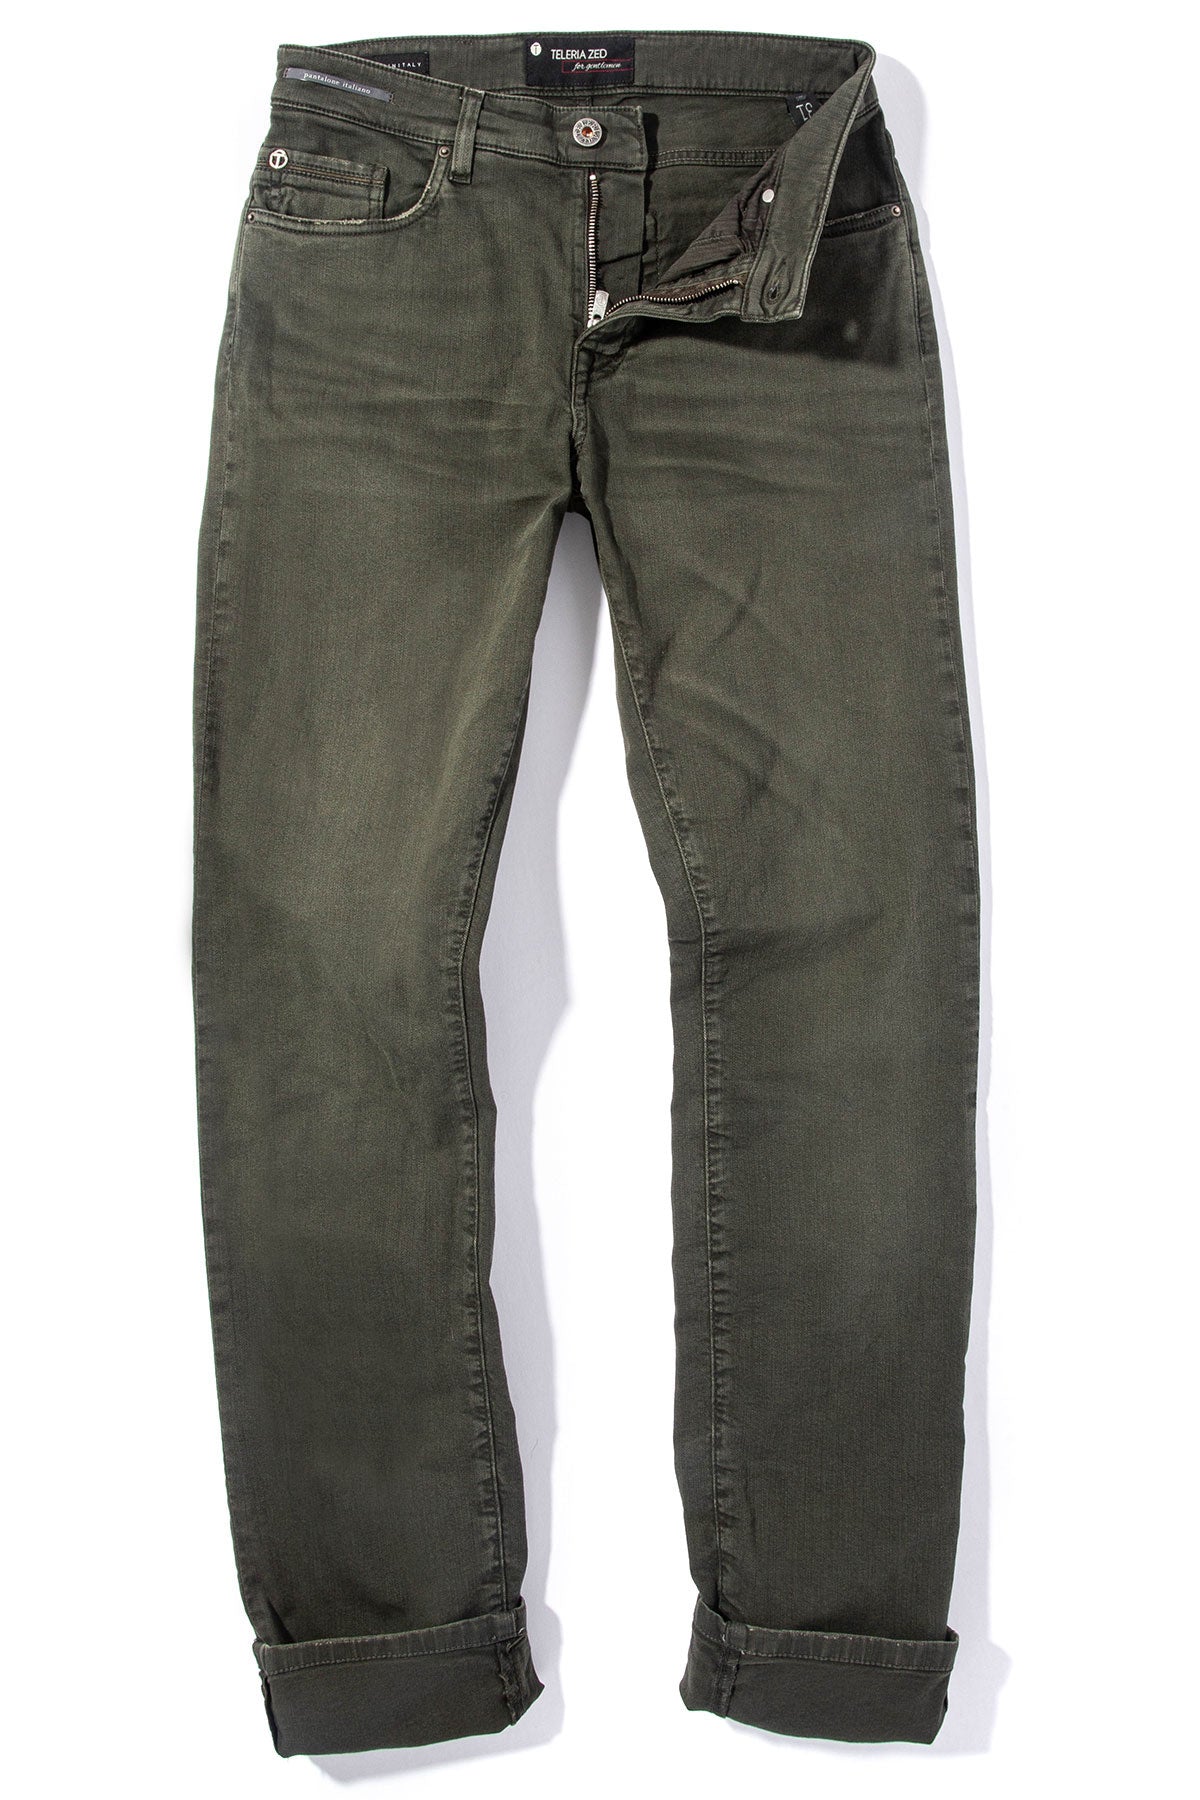 Ouray 5-Pocket Stretch Twill in Muschio | Mens - Pants - 5 Pocket | Teleria Zed